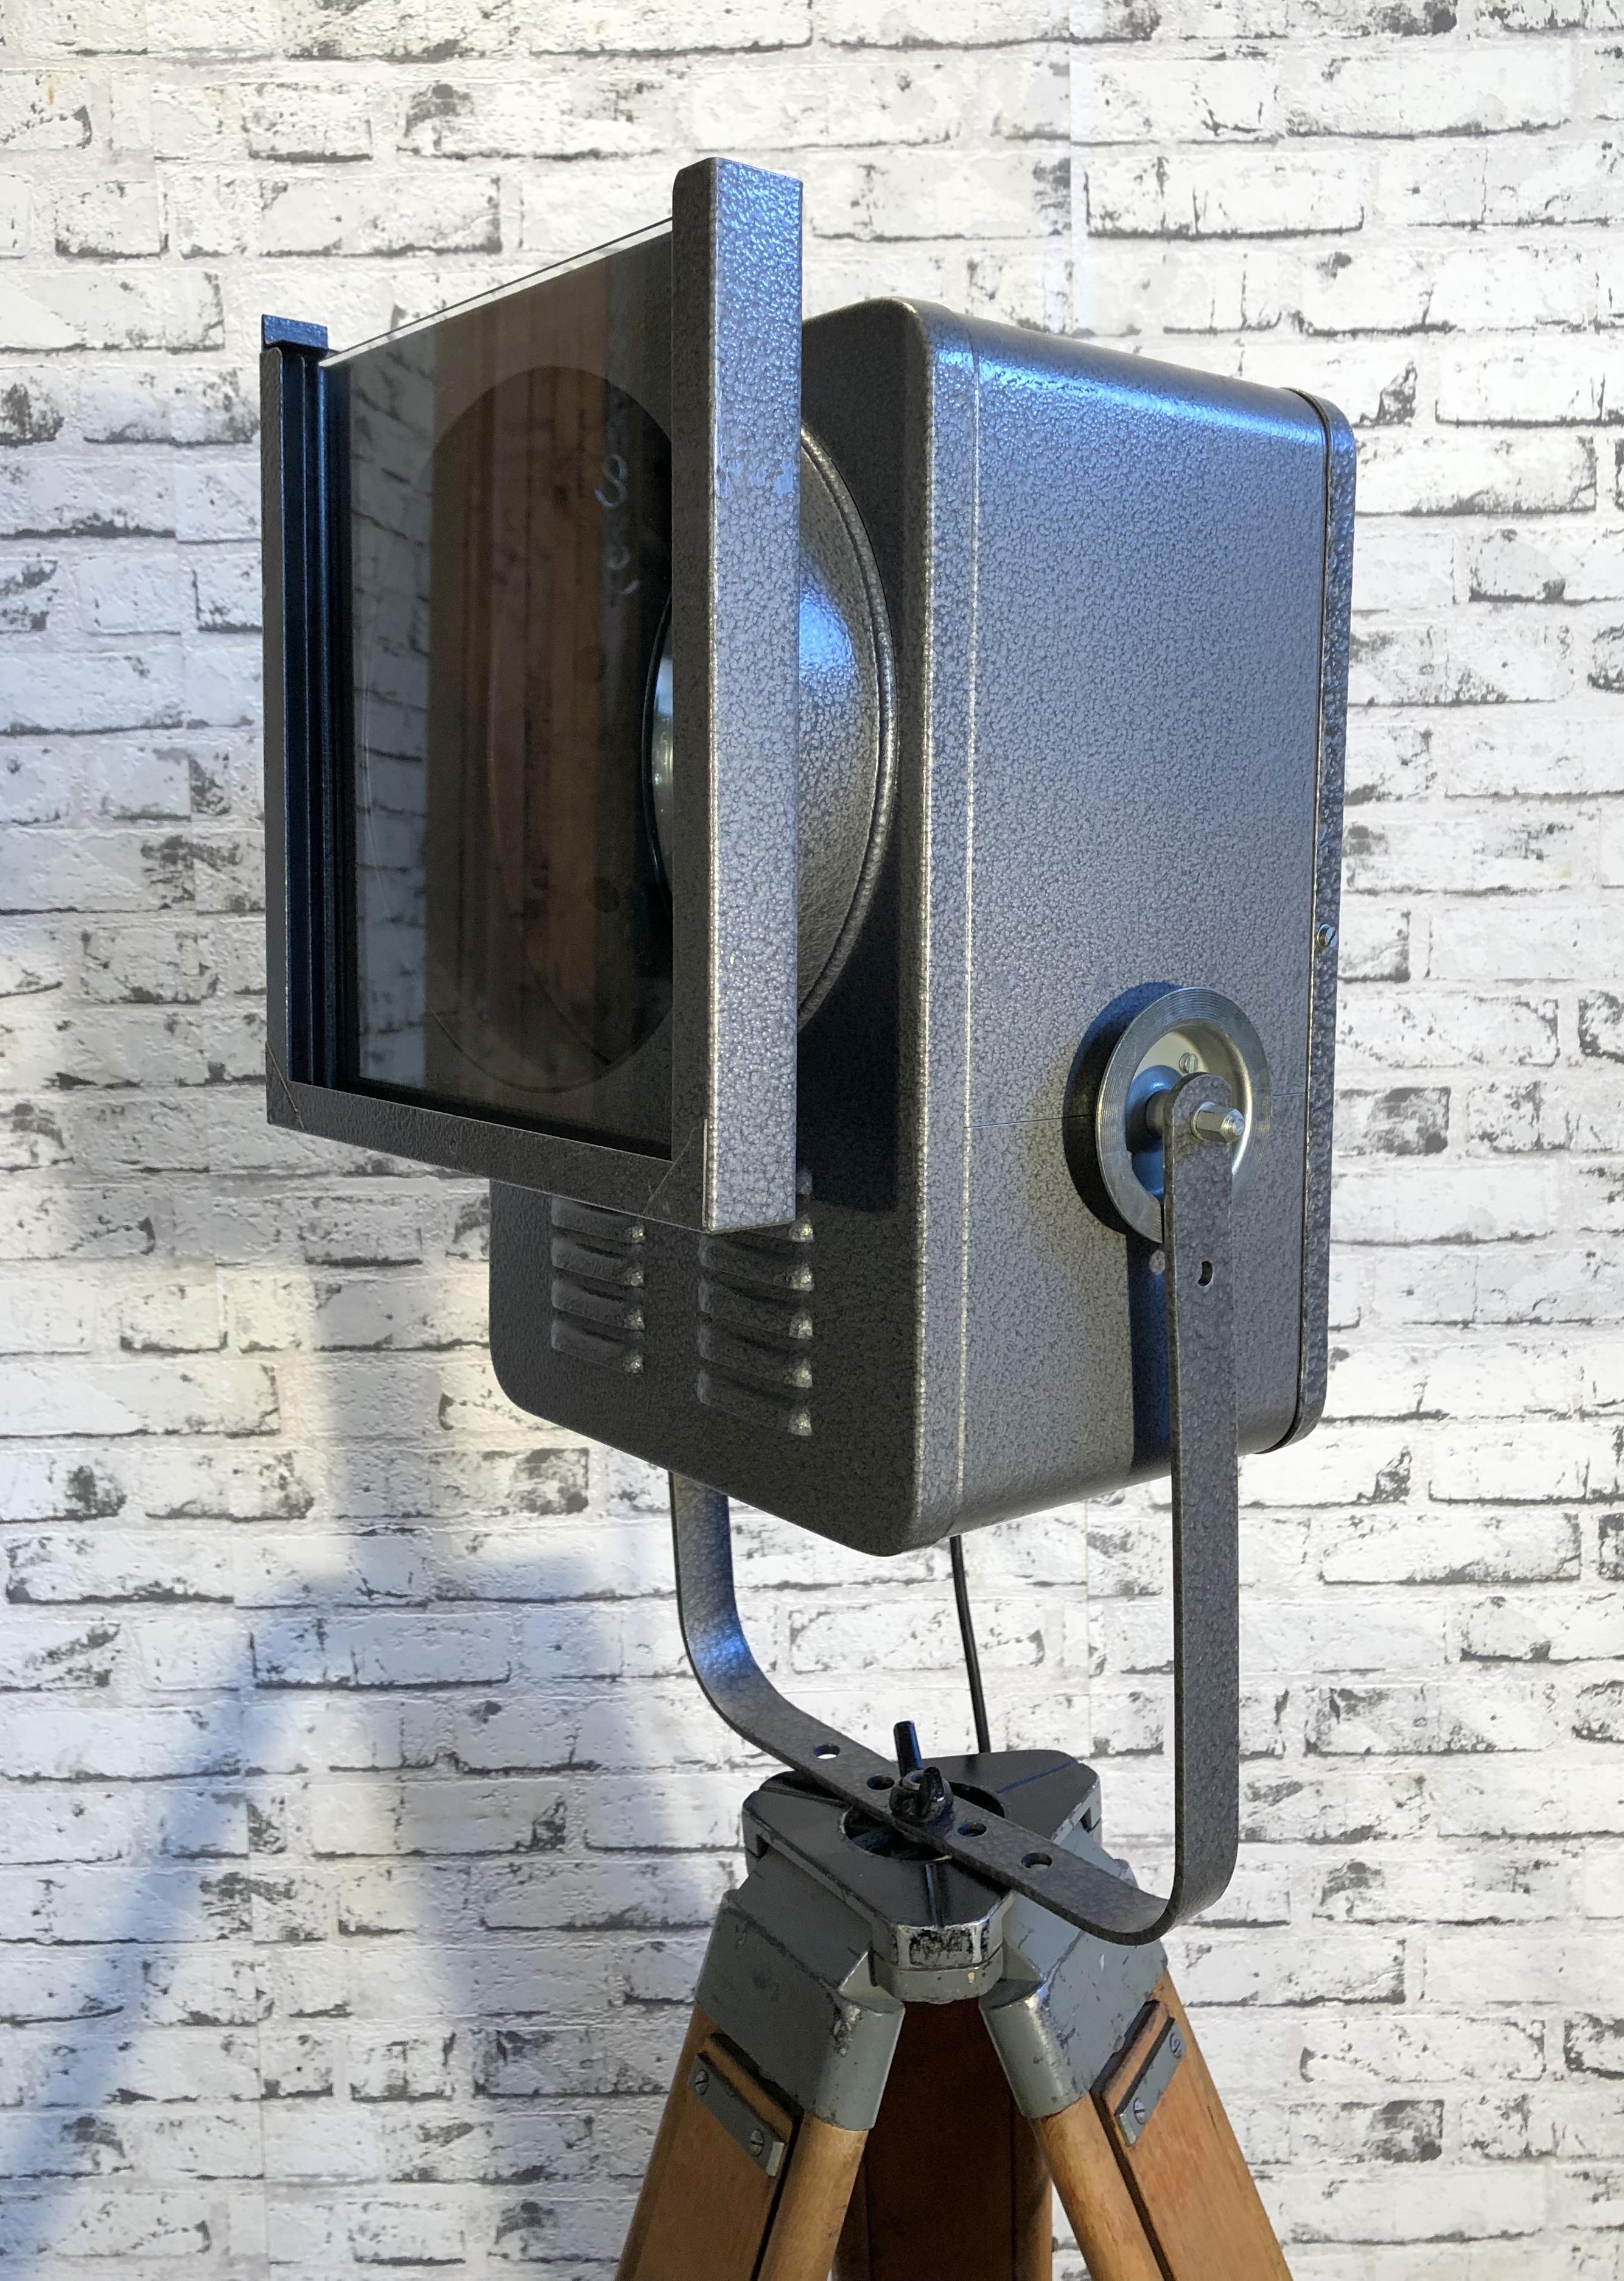 This adjustable theater reflector comes from former Czechoslovakia. It was made in the 1980s. The spotlight has a gray hammered finish on the metal body and features clear glass. It is fitted with an E 27 socket.

Additional dimensions:
-